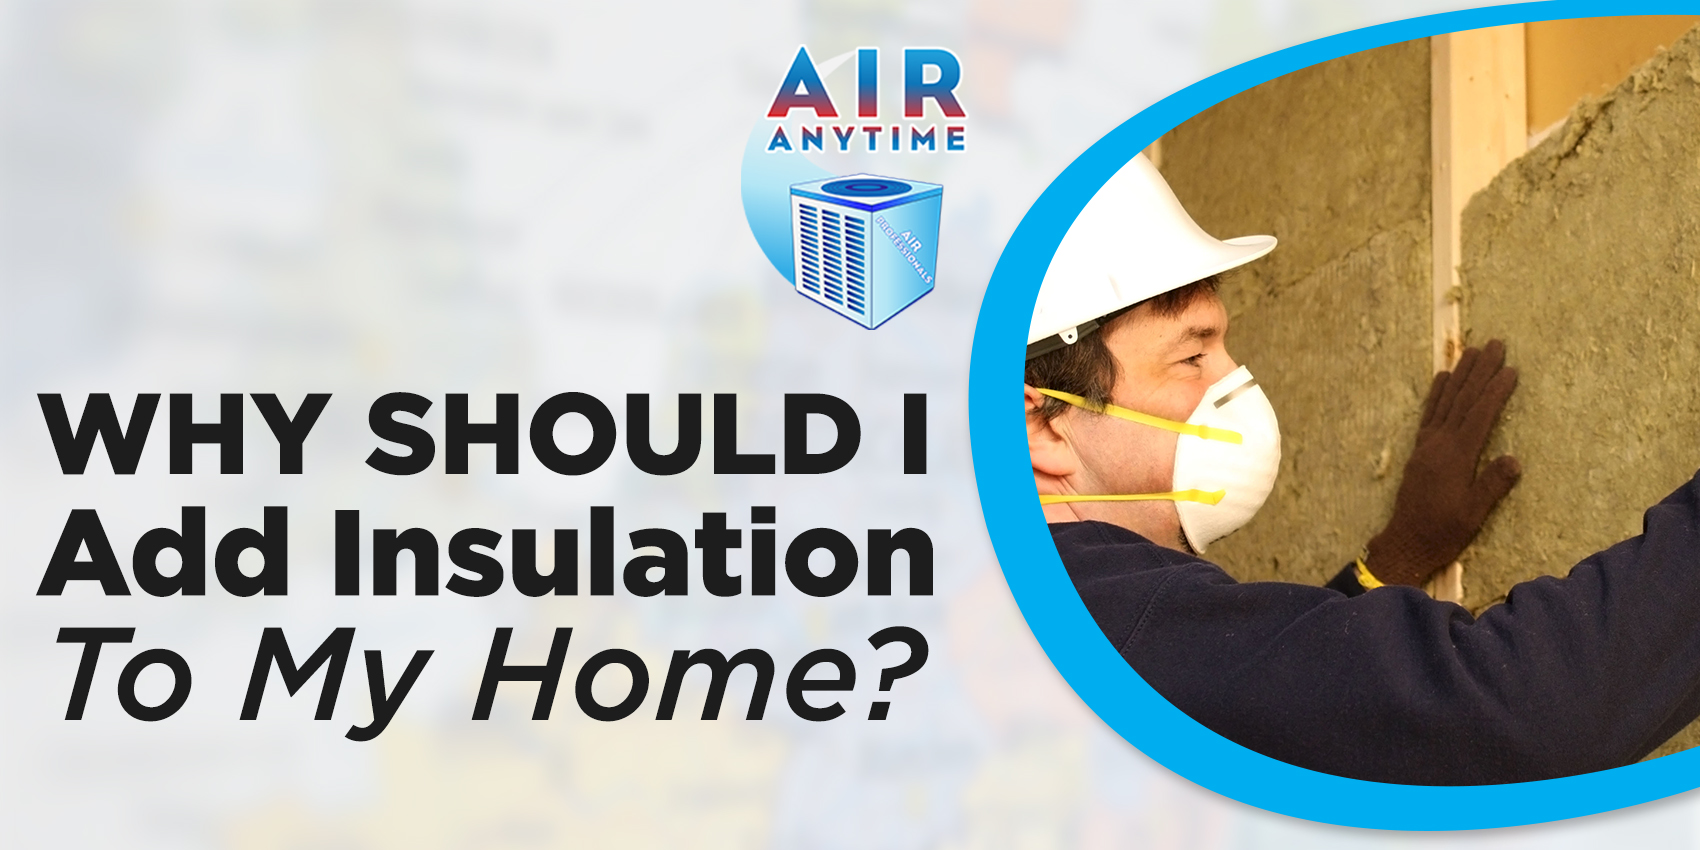 Why Should I Add Insulation To My Home?